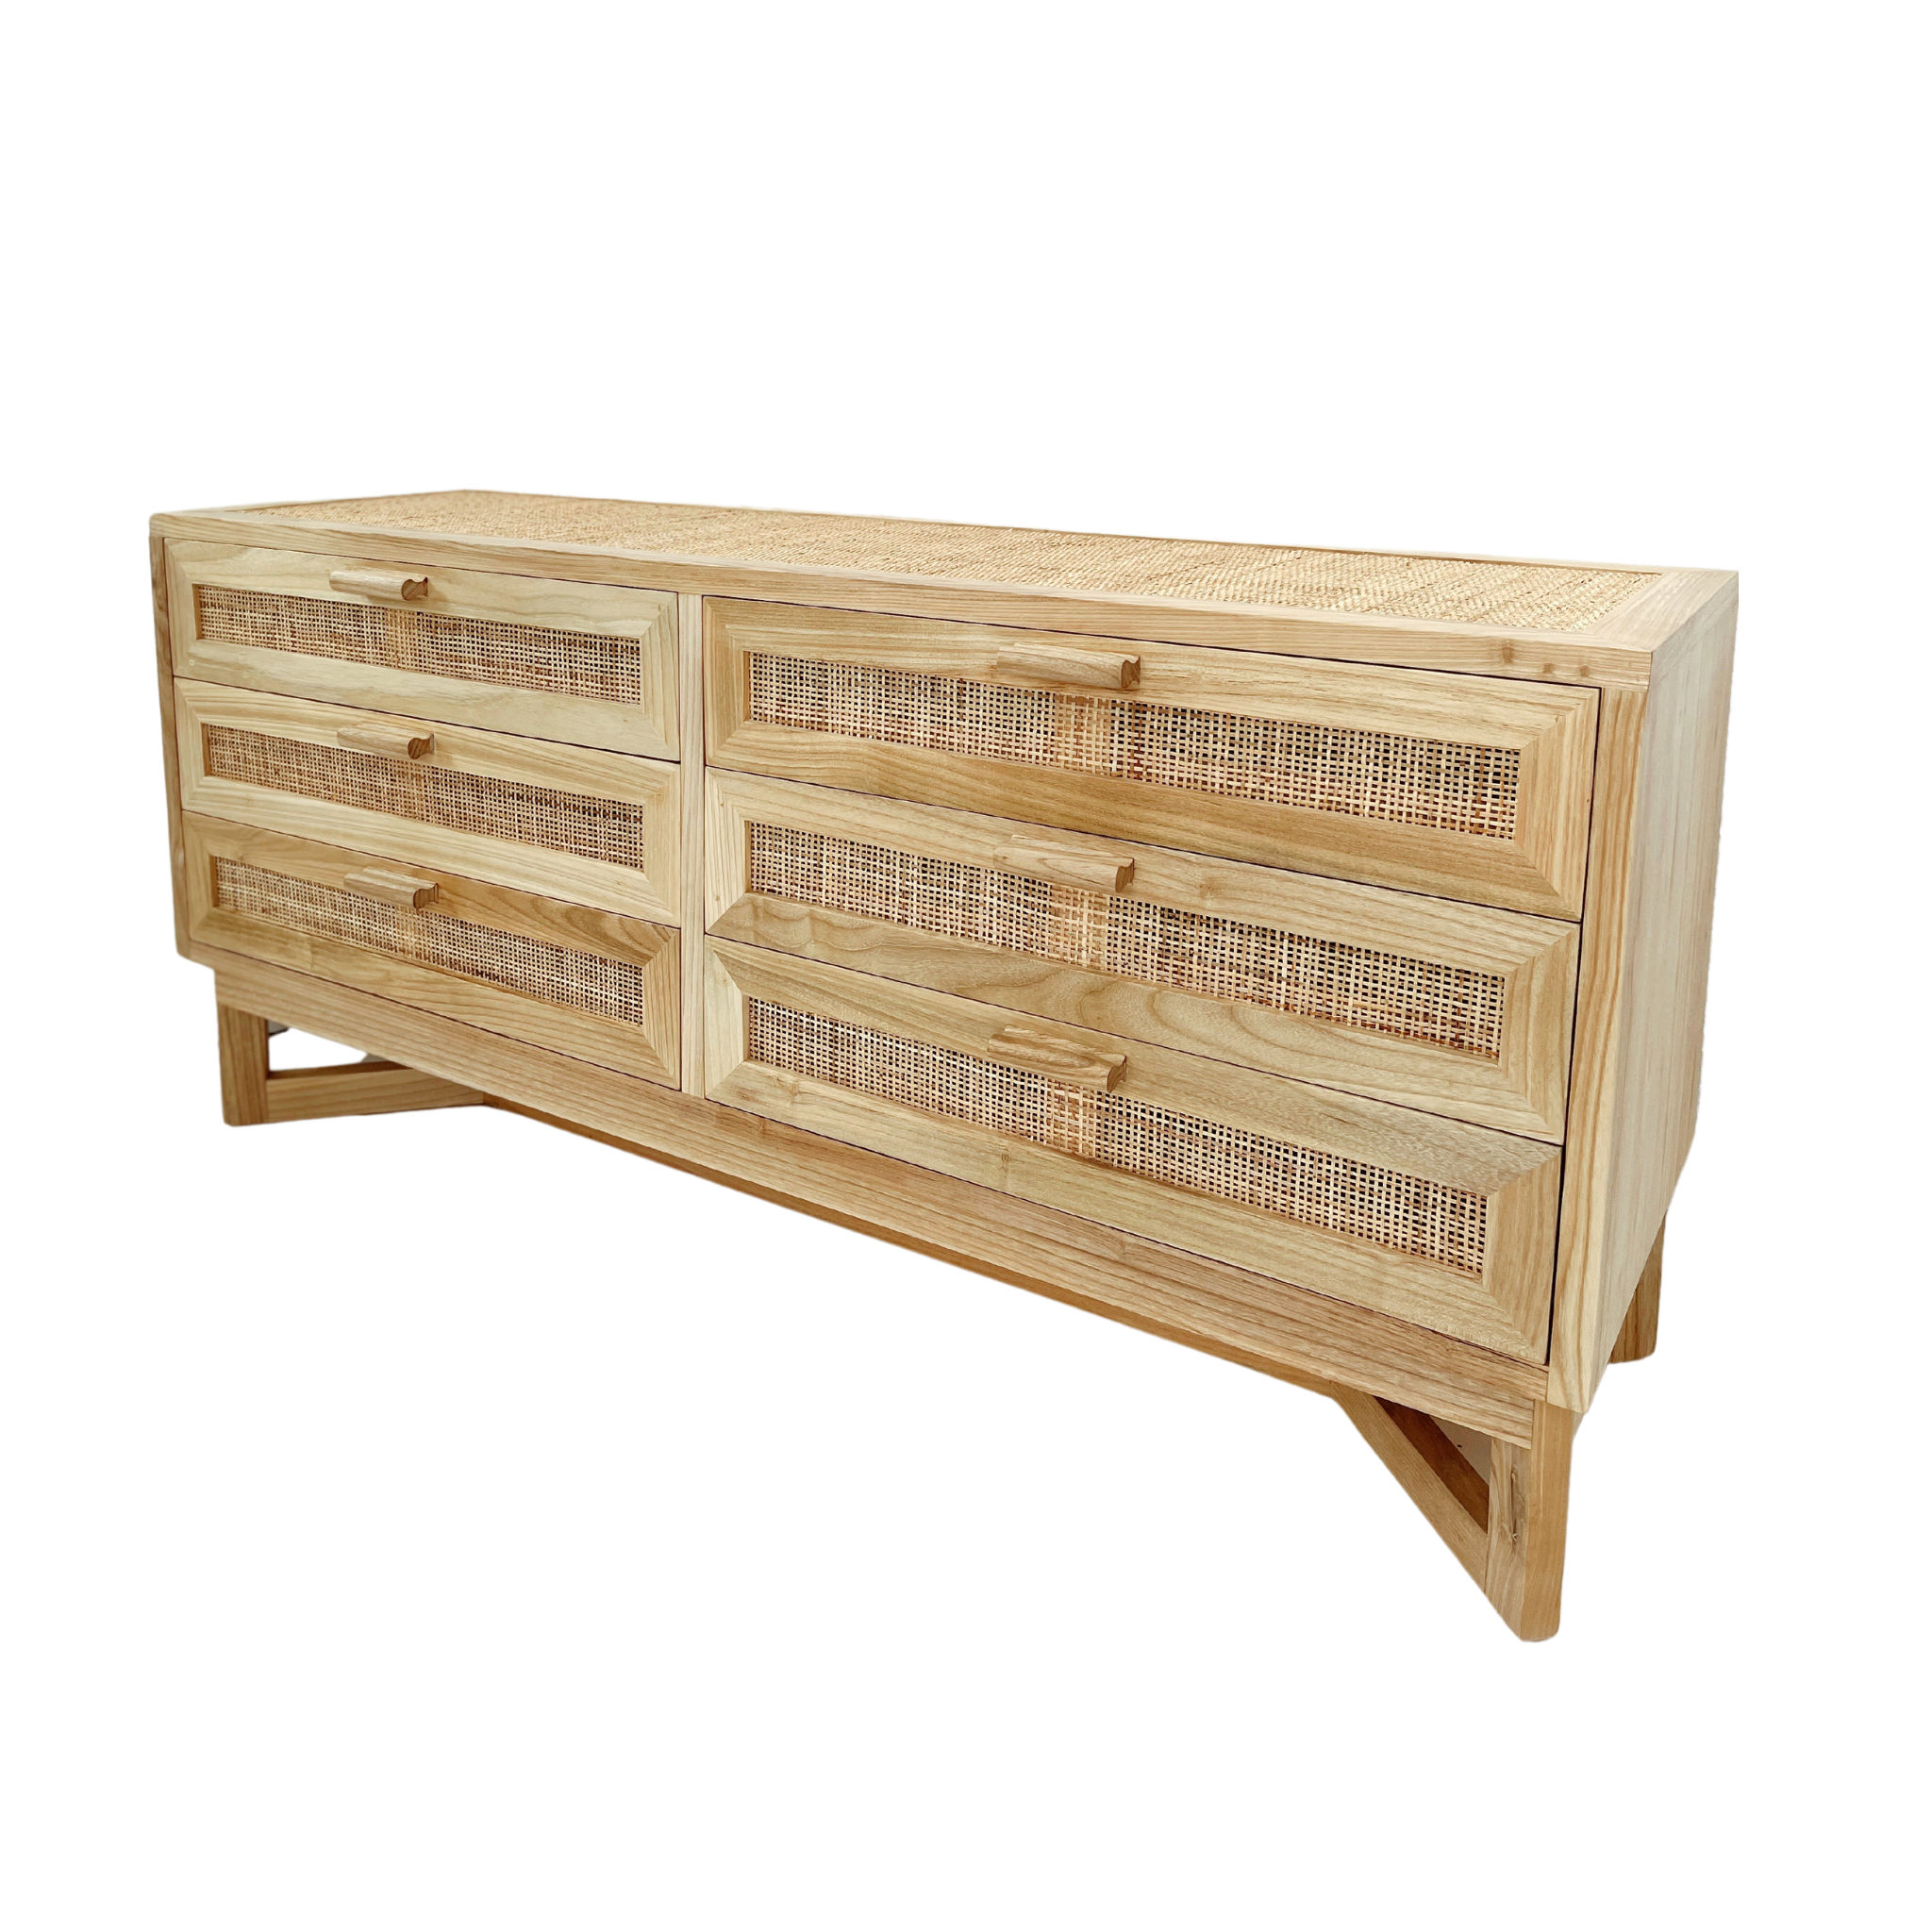 THE SEVILLE DRAWERS